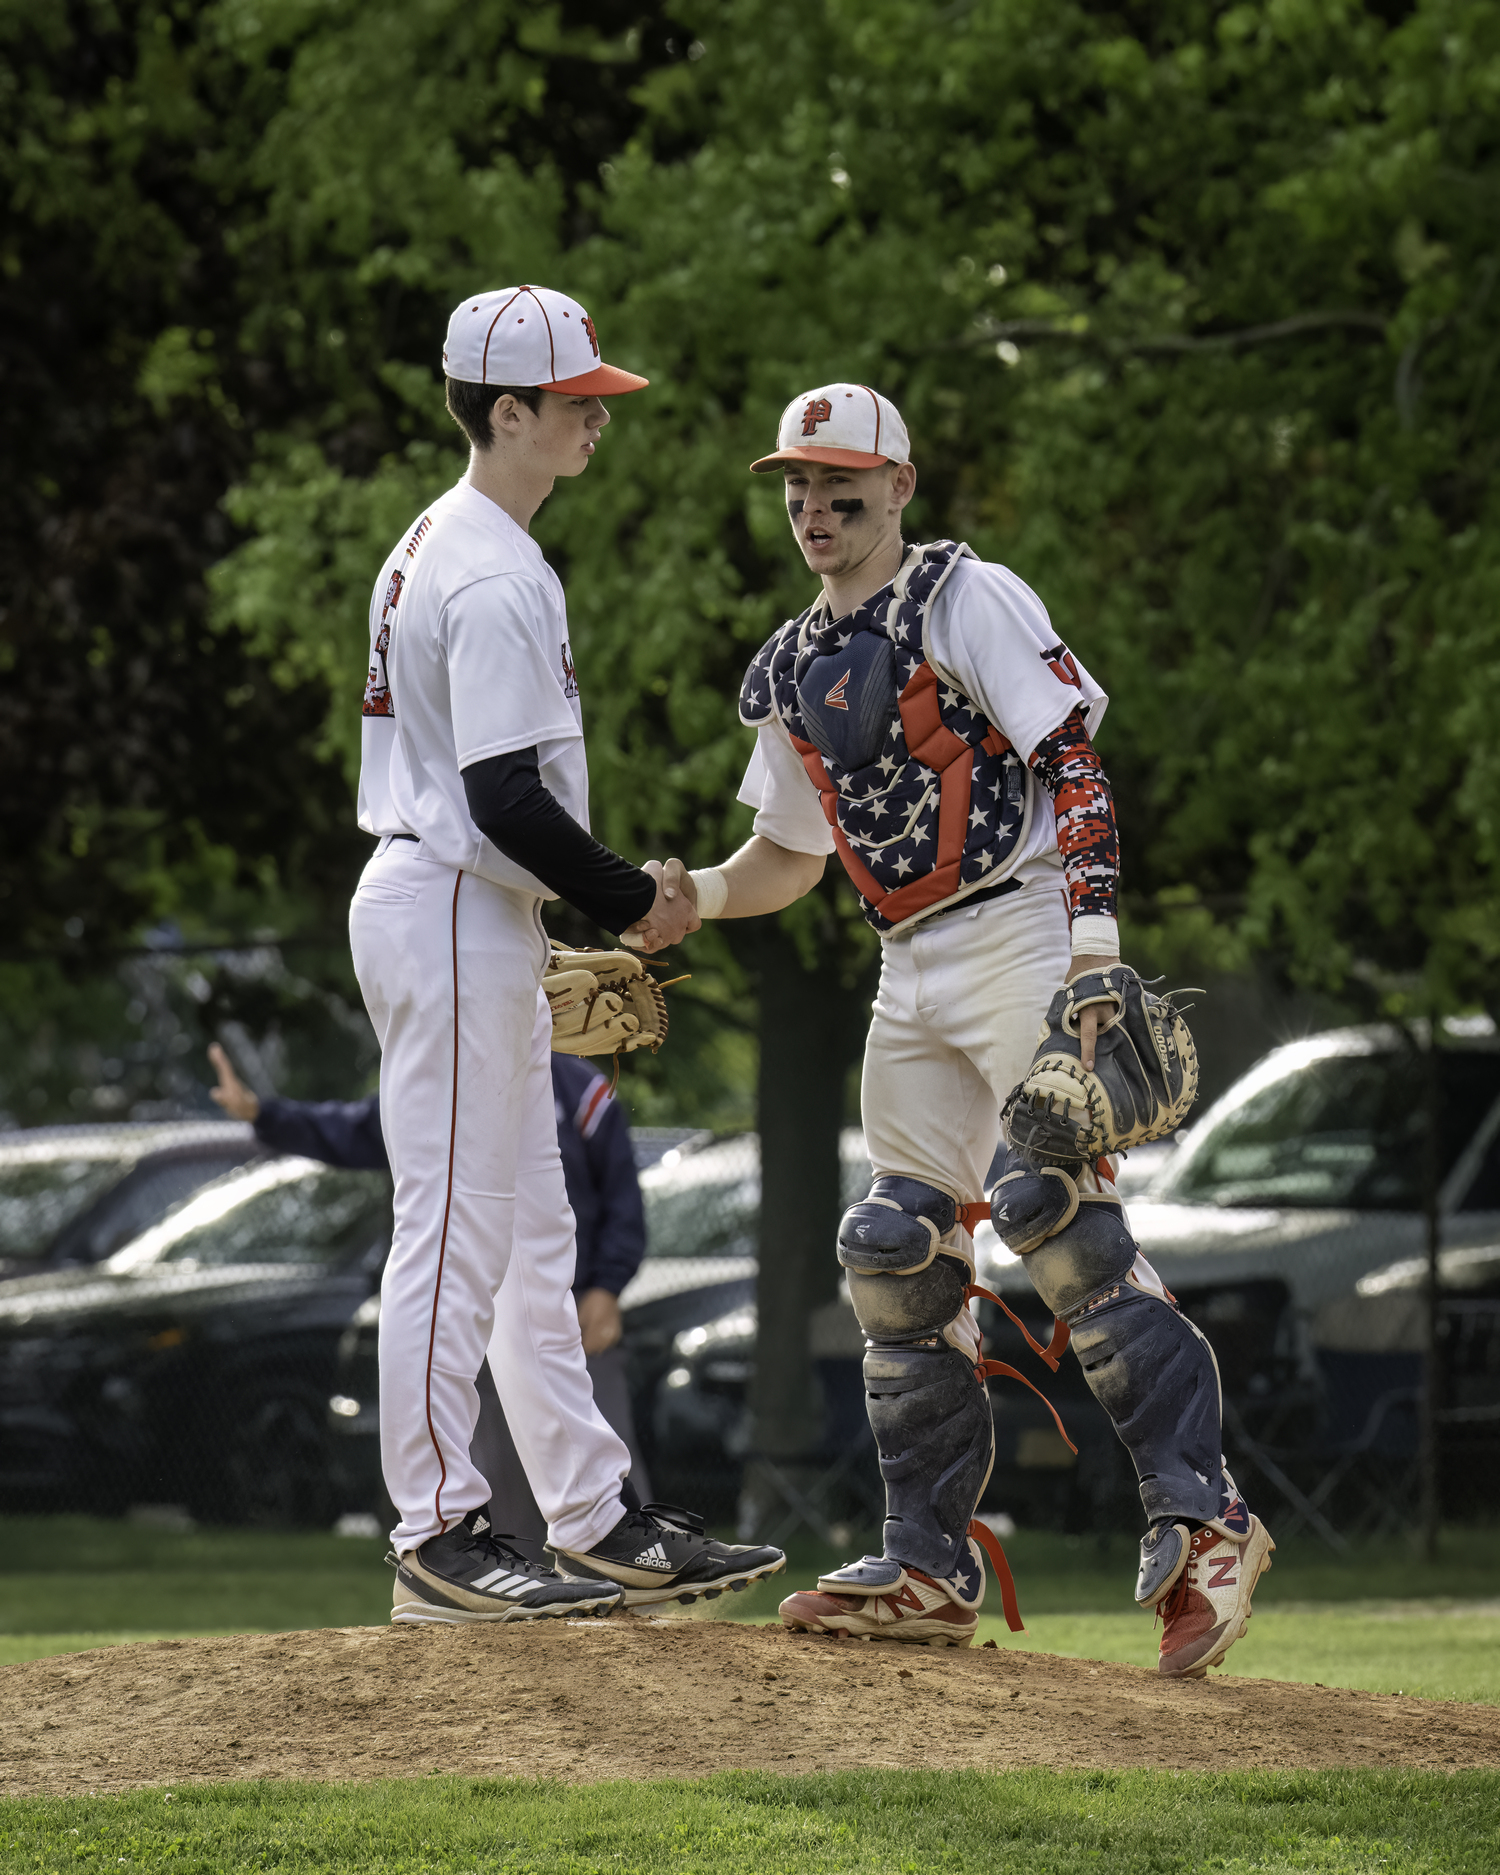 Catcher Gavin Gilbride gives a reaffirming handshake to his pitcher Nathan Dee who pitched well in relief on Friday.   MARIANNE BARNETT